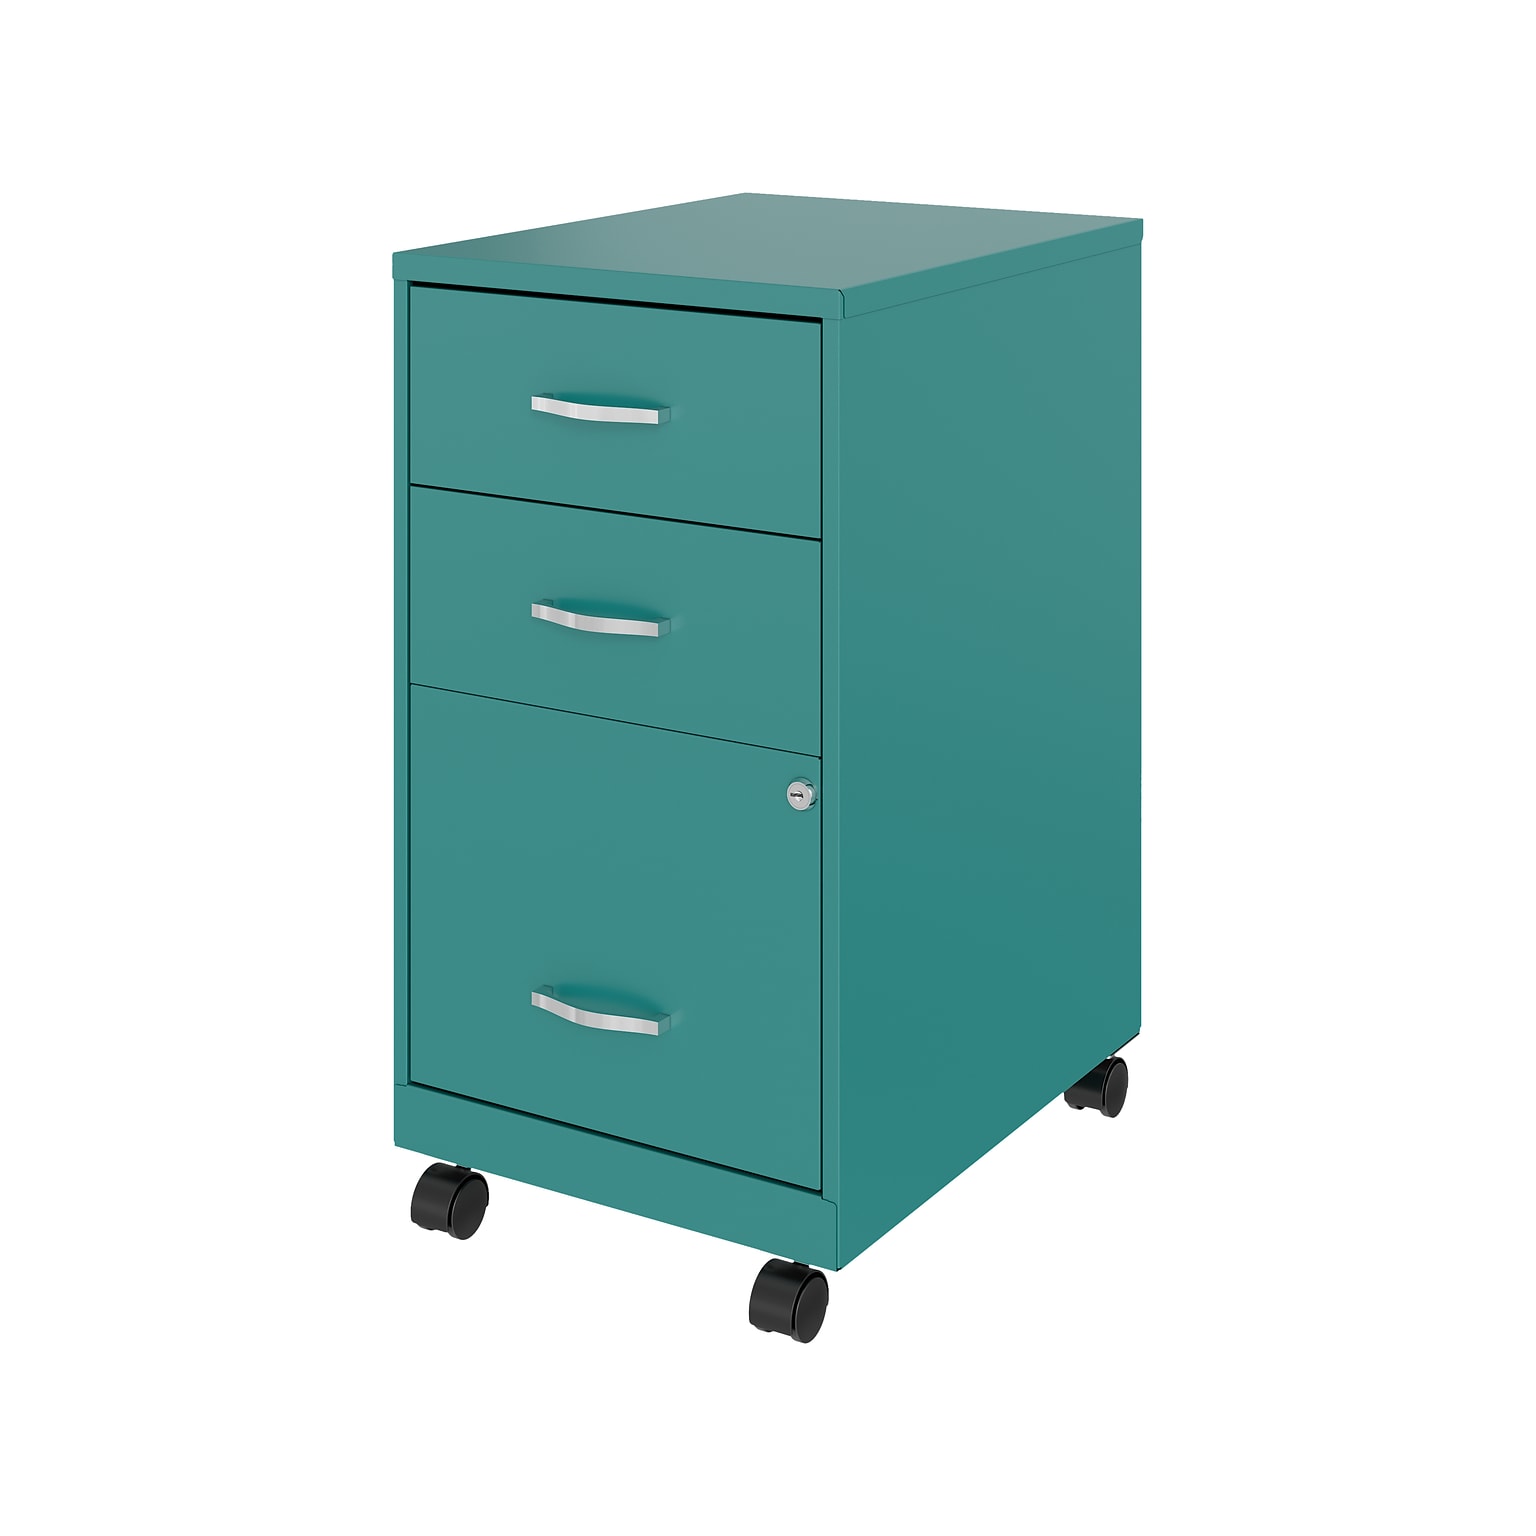 Space Solutions 3-Drawer Mobile Vertical File Cabinet, Letter Size, Lockable, 26.7H x 14.25W x 18D, Teal (24431)